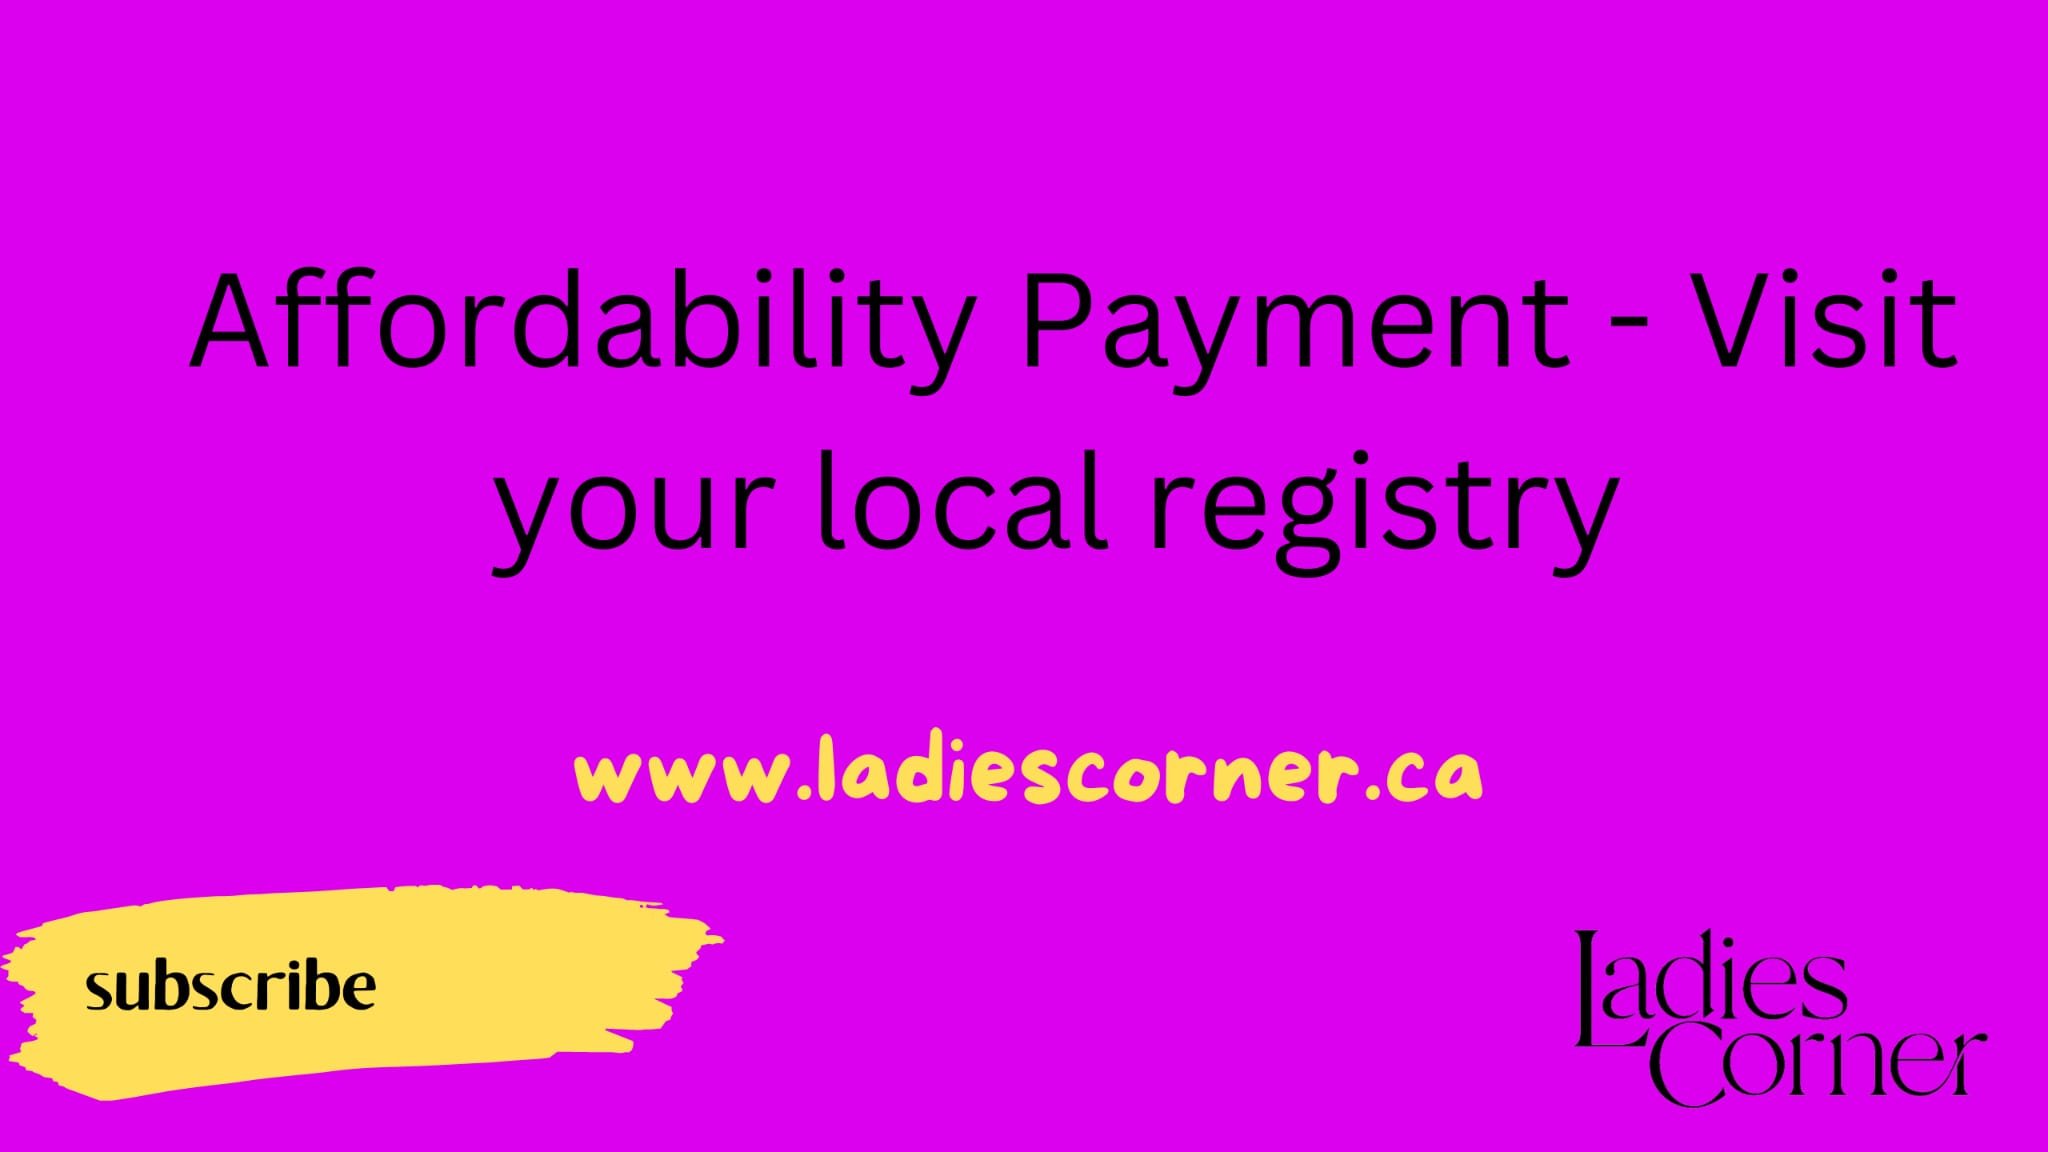 Any Alberta registry agent can help you apply for Affordability Payments.